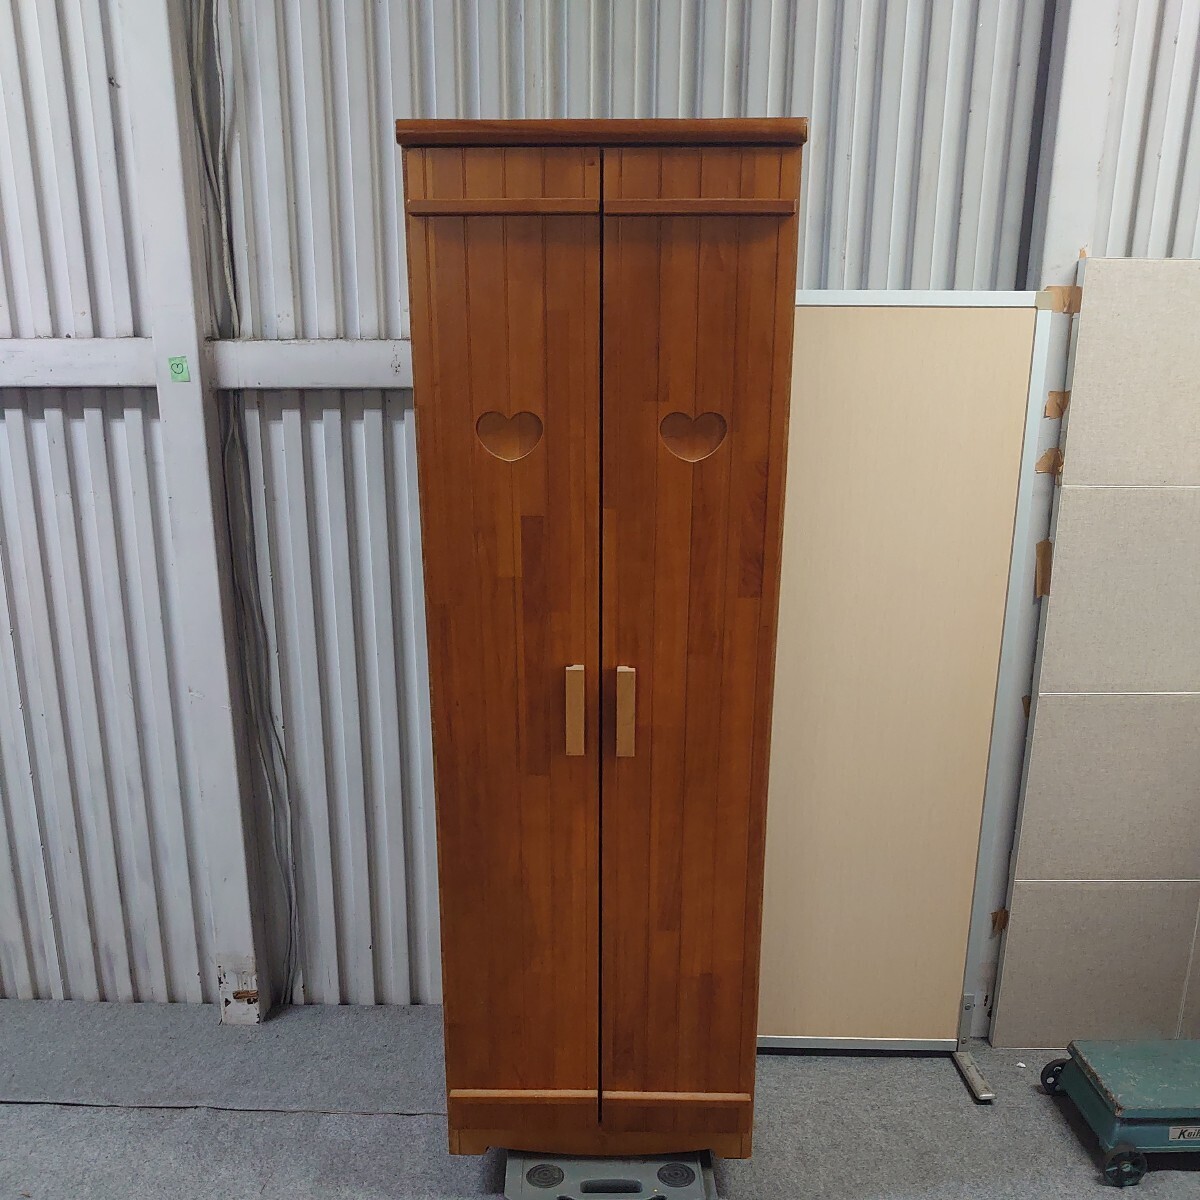  wooden closet storage wardrobe furniture interior cheap selling out ..-.